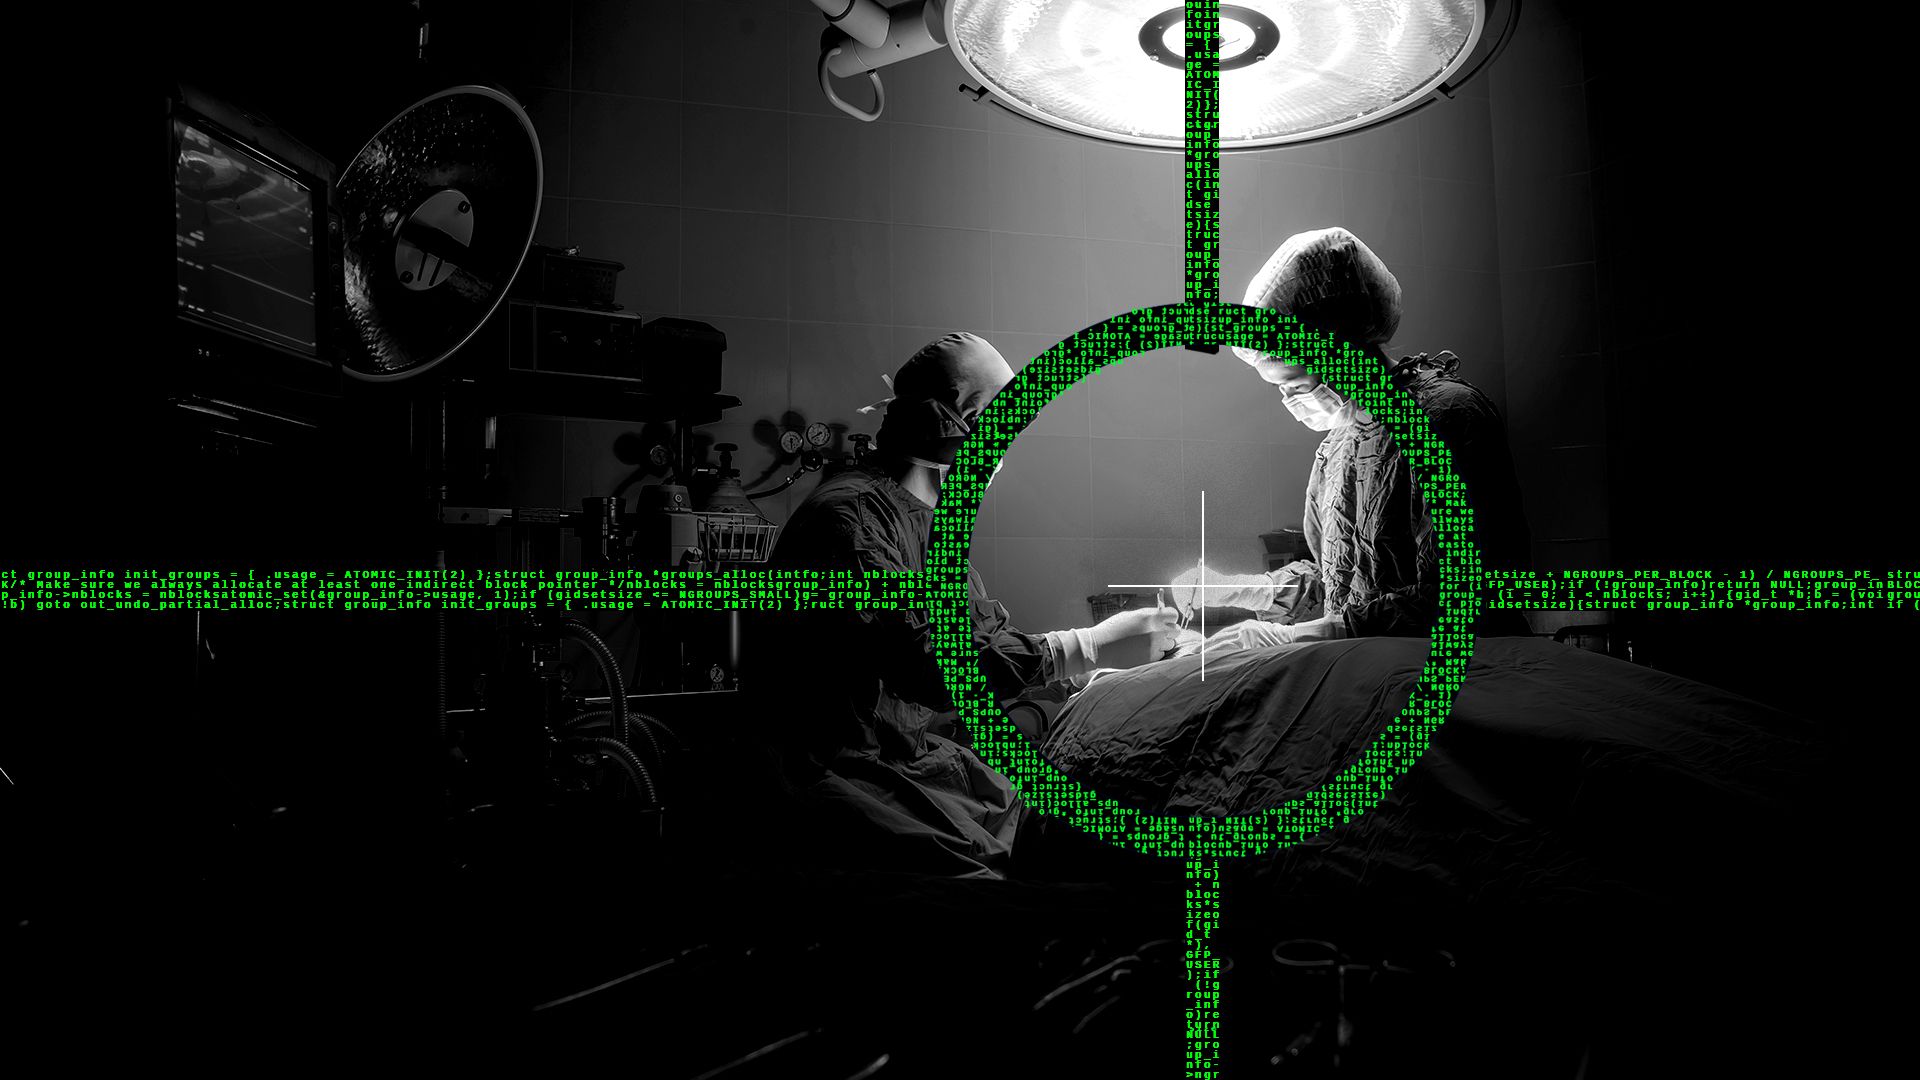 In this illustration, two surgeons perform an operation while a crosshair is seen over both of them.